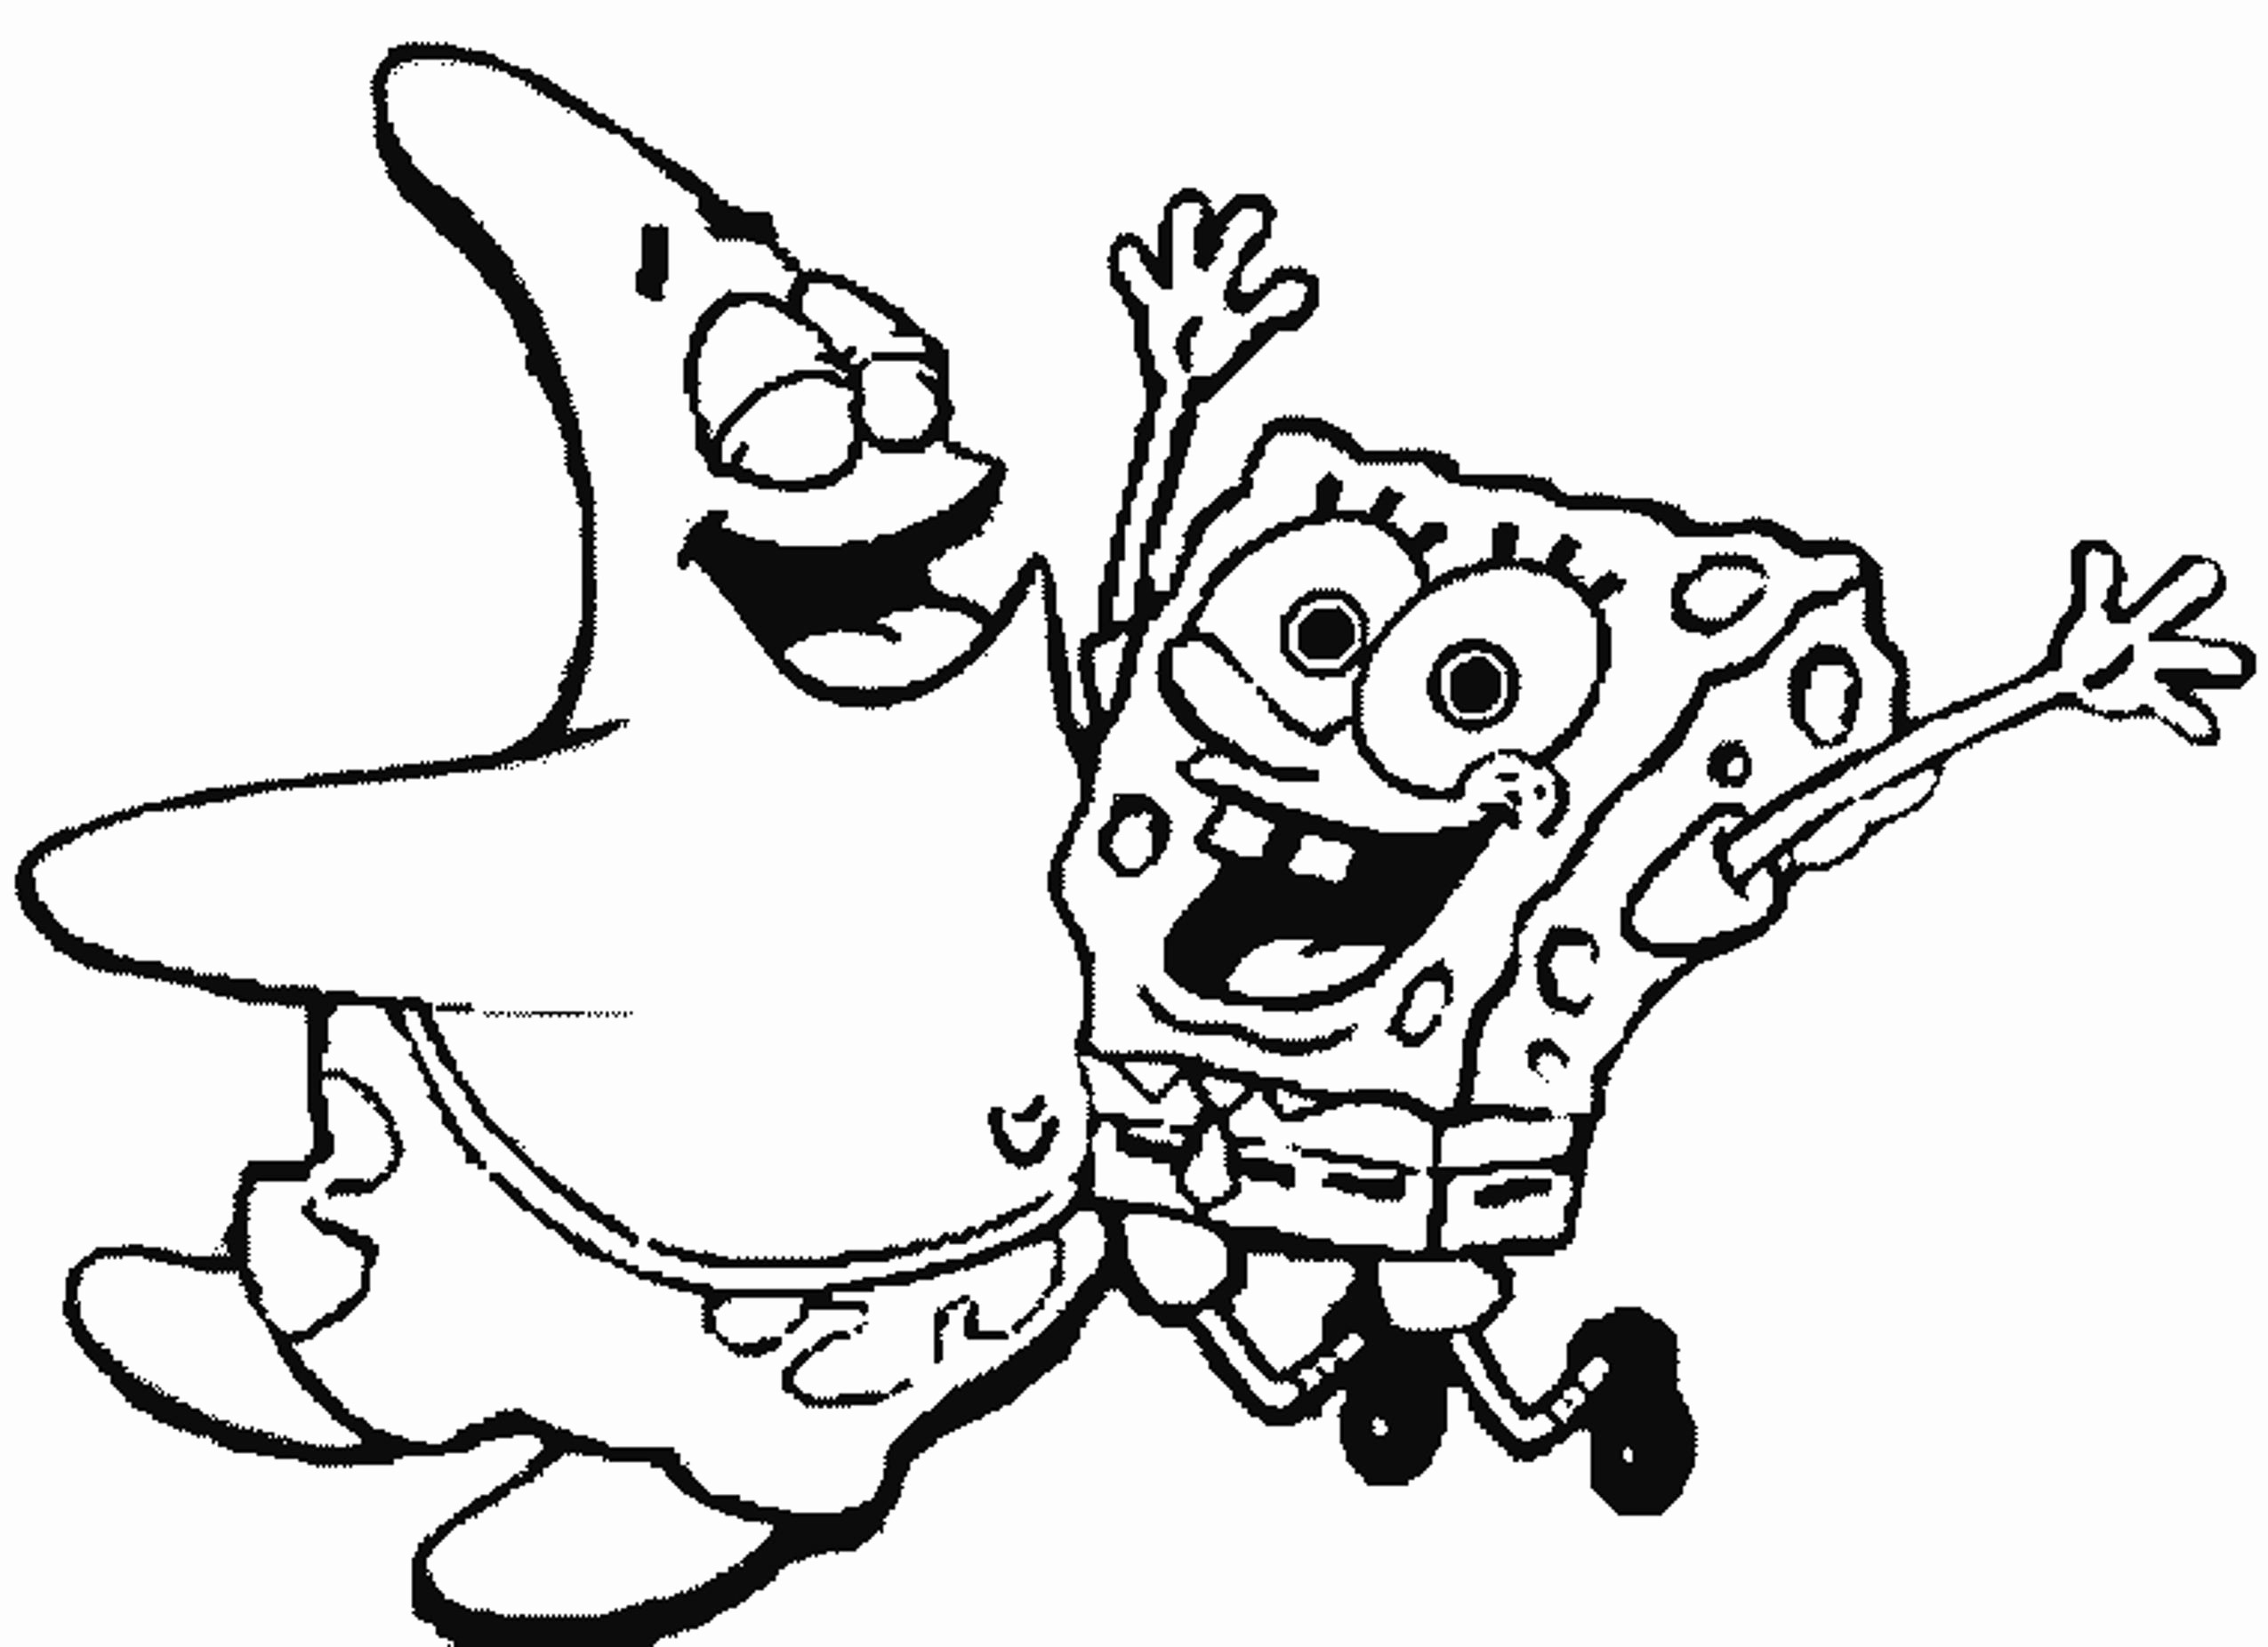 Pdf Coloring Pages For Kids Coloring Book Cooloring Book Spongebob Coloring Pages Pdf Free